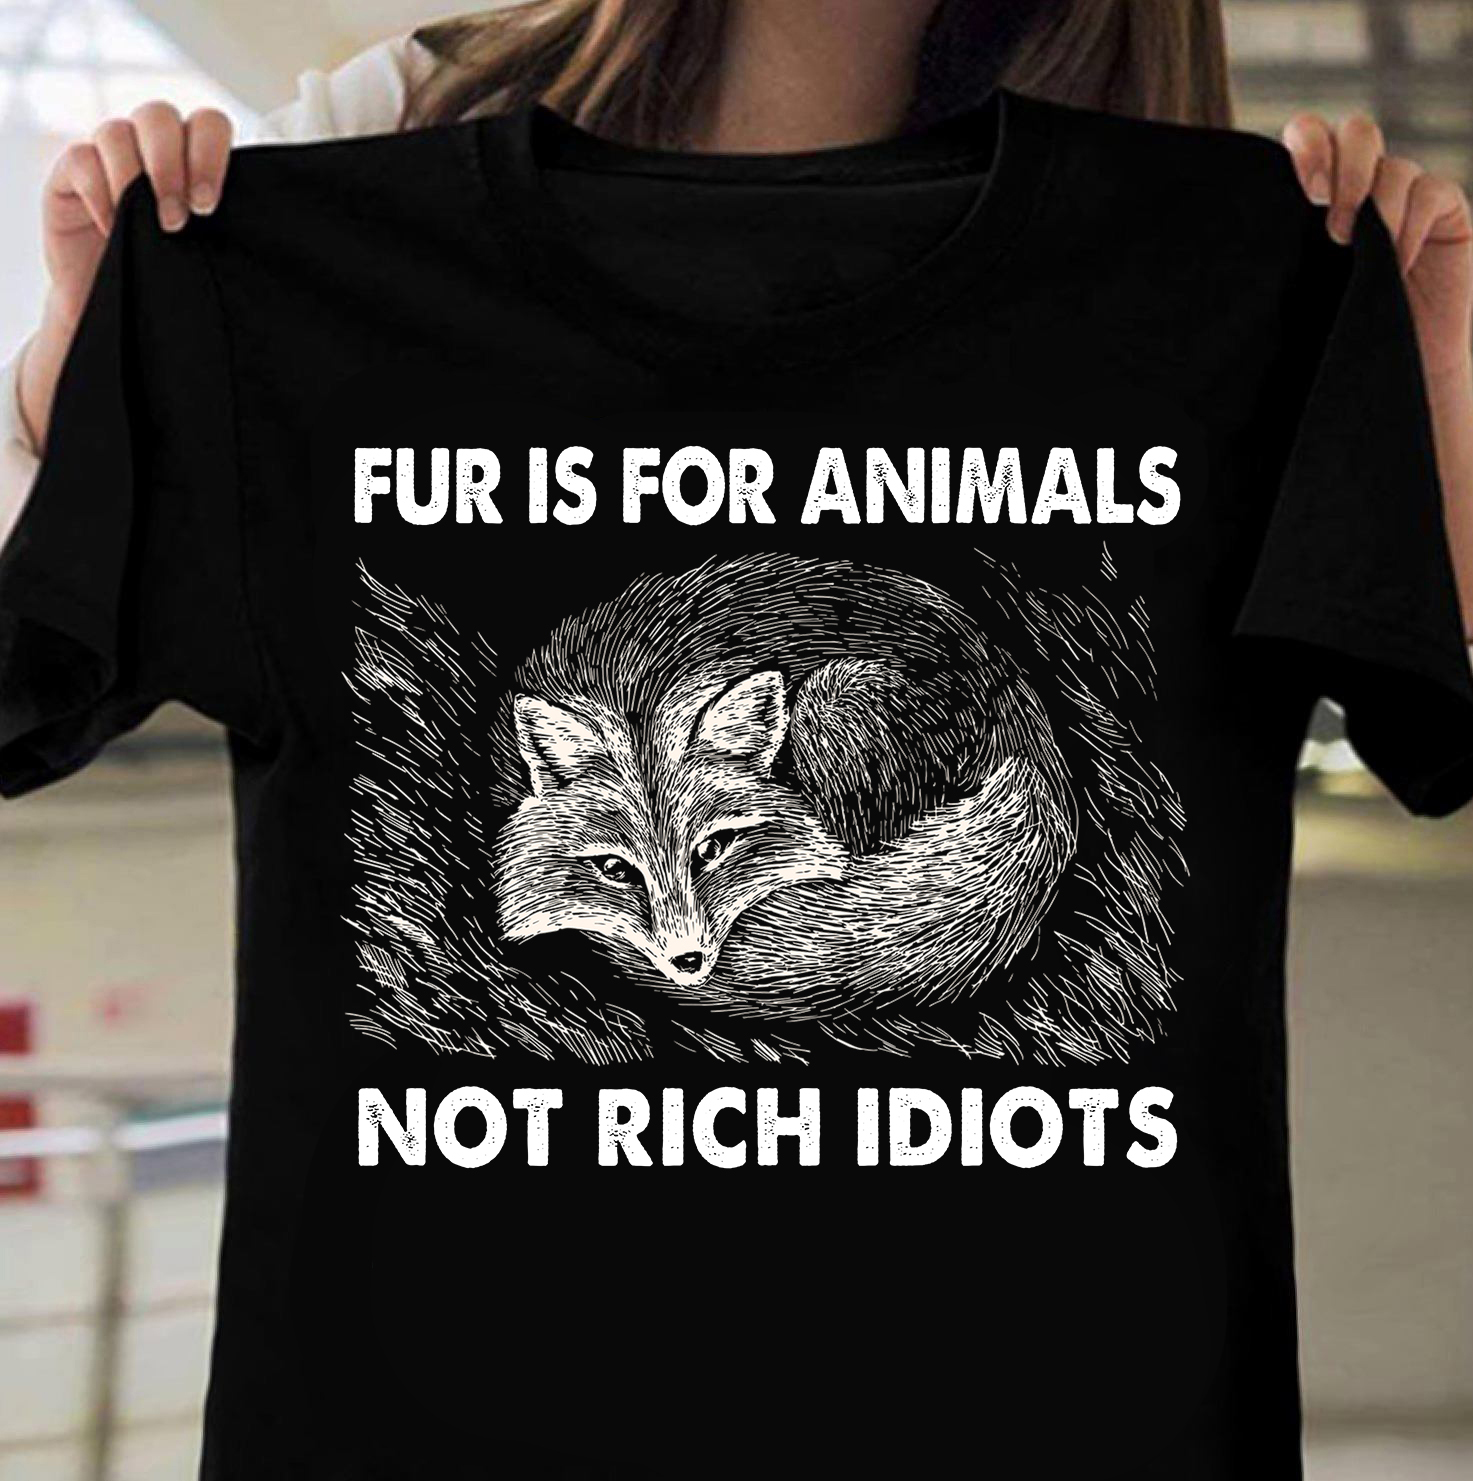 Fur is for animals not rich idiots - Fox and fur